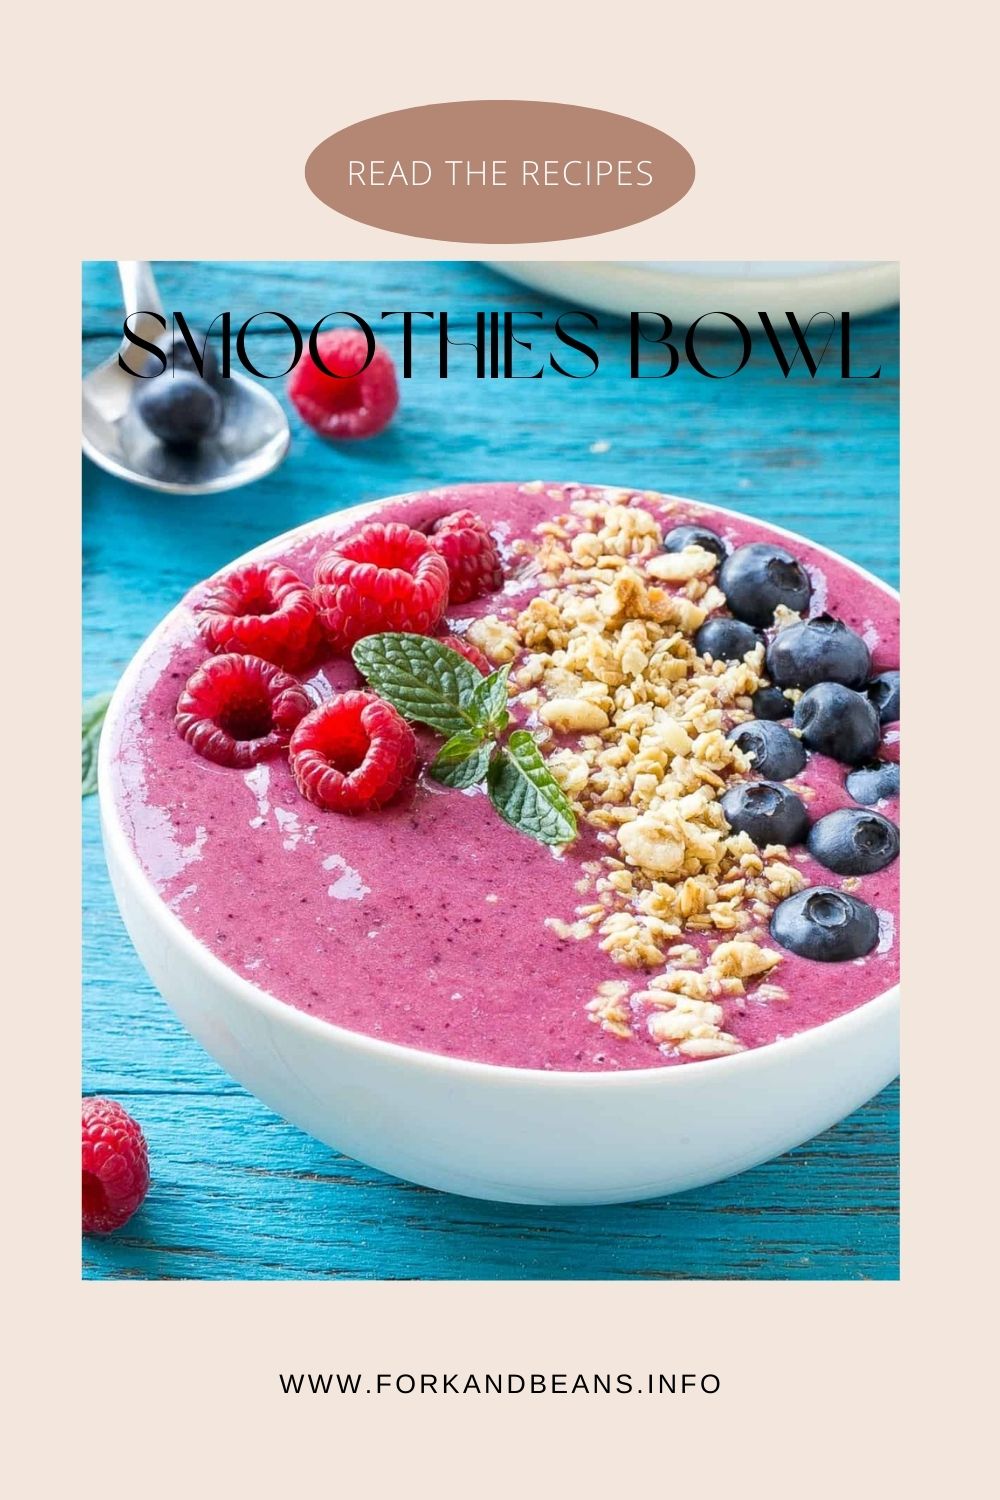 RECIPE FOR TRIPLE BERRY SMOOTHIE BOWLS